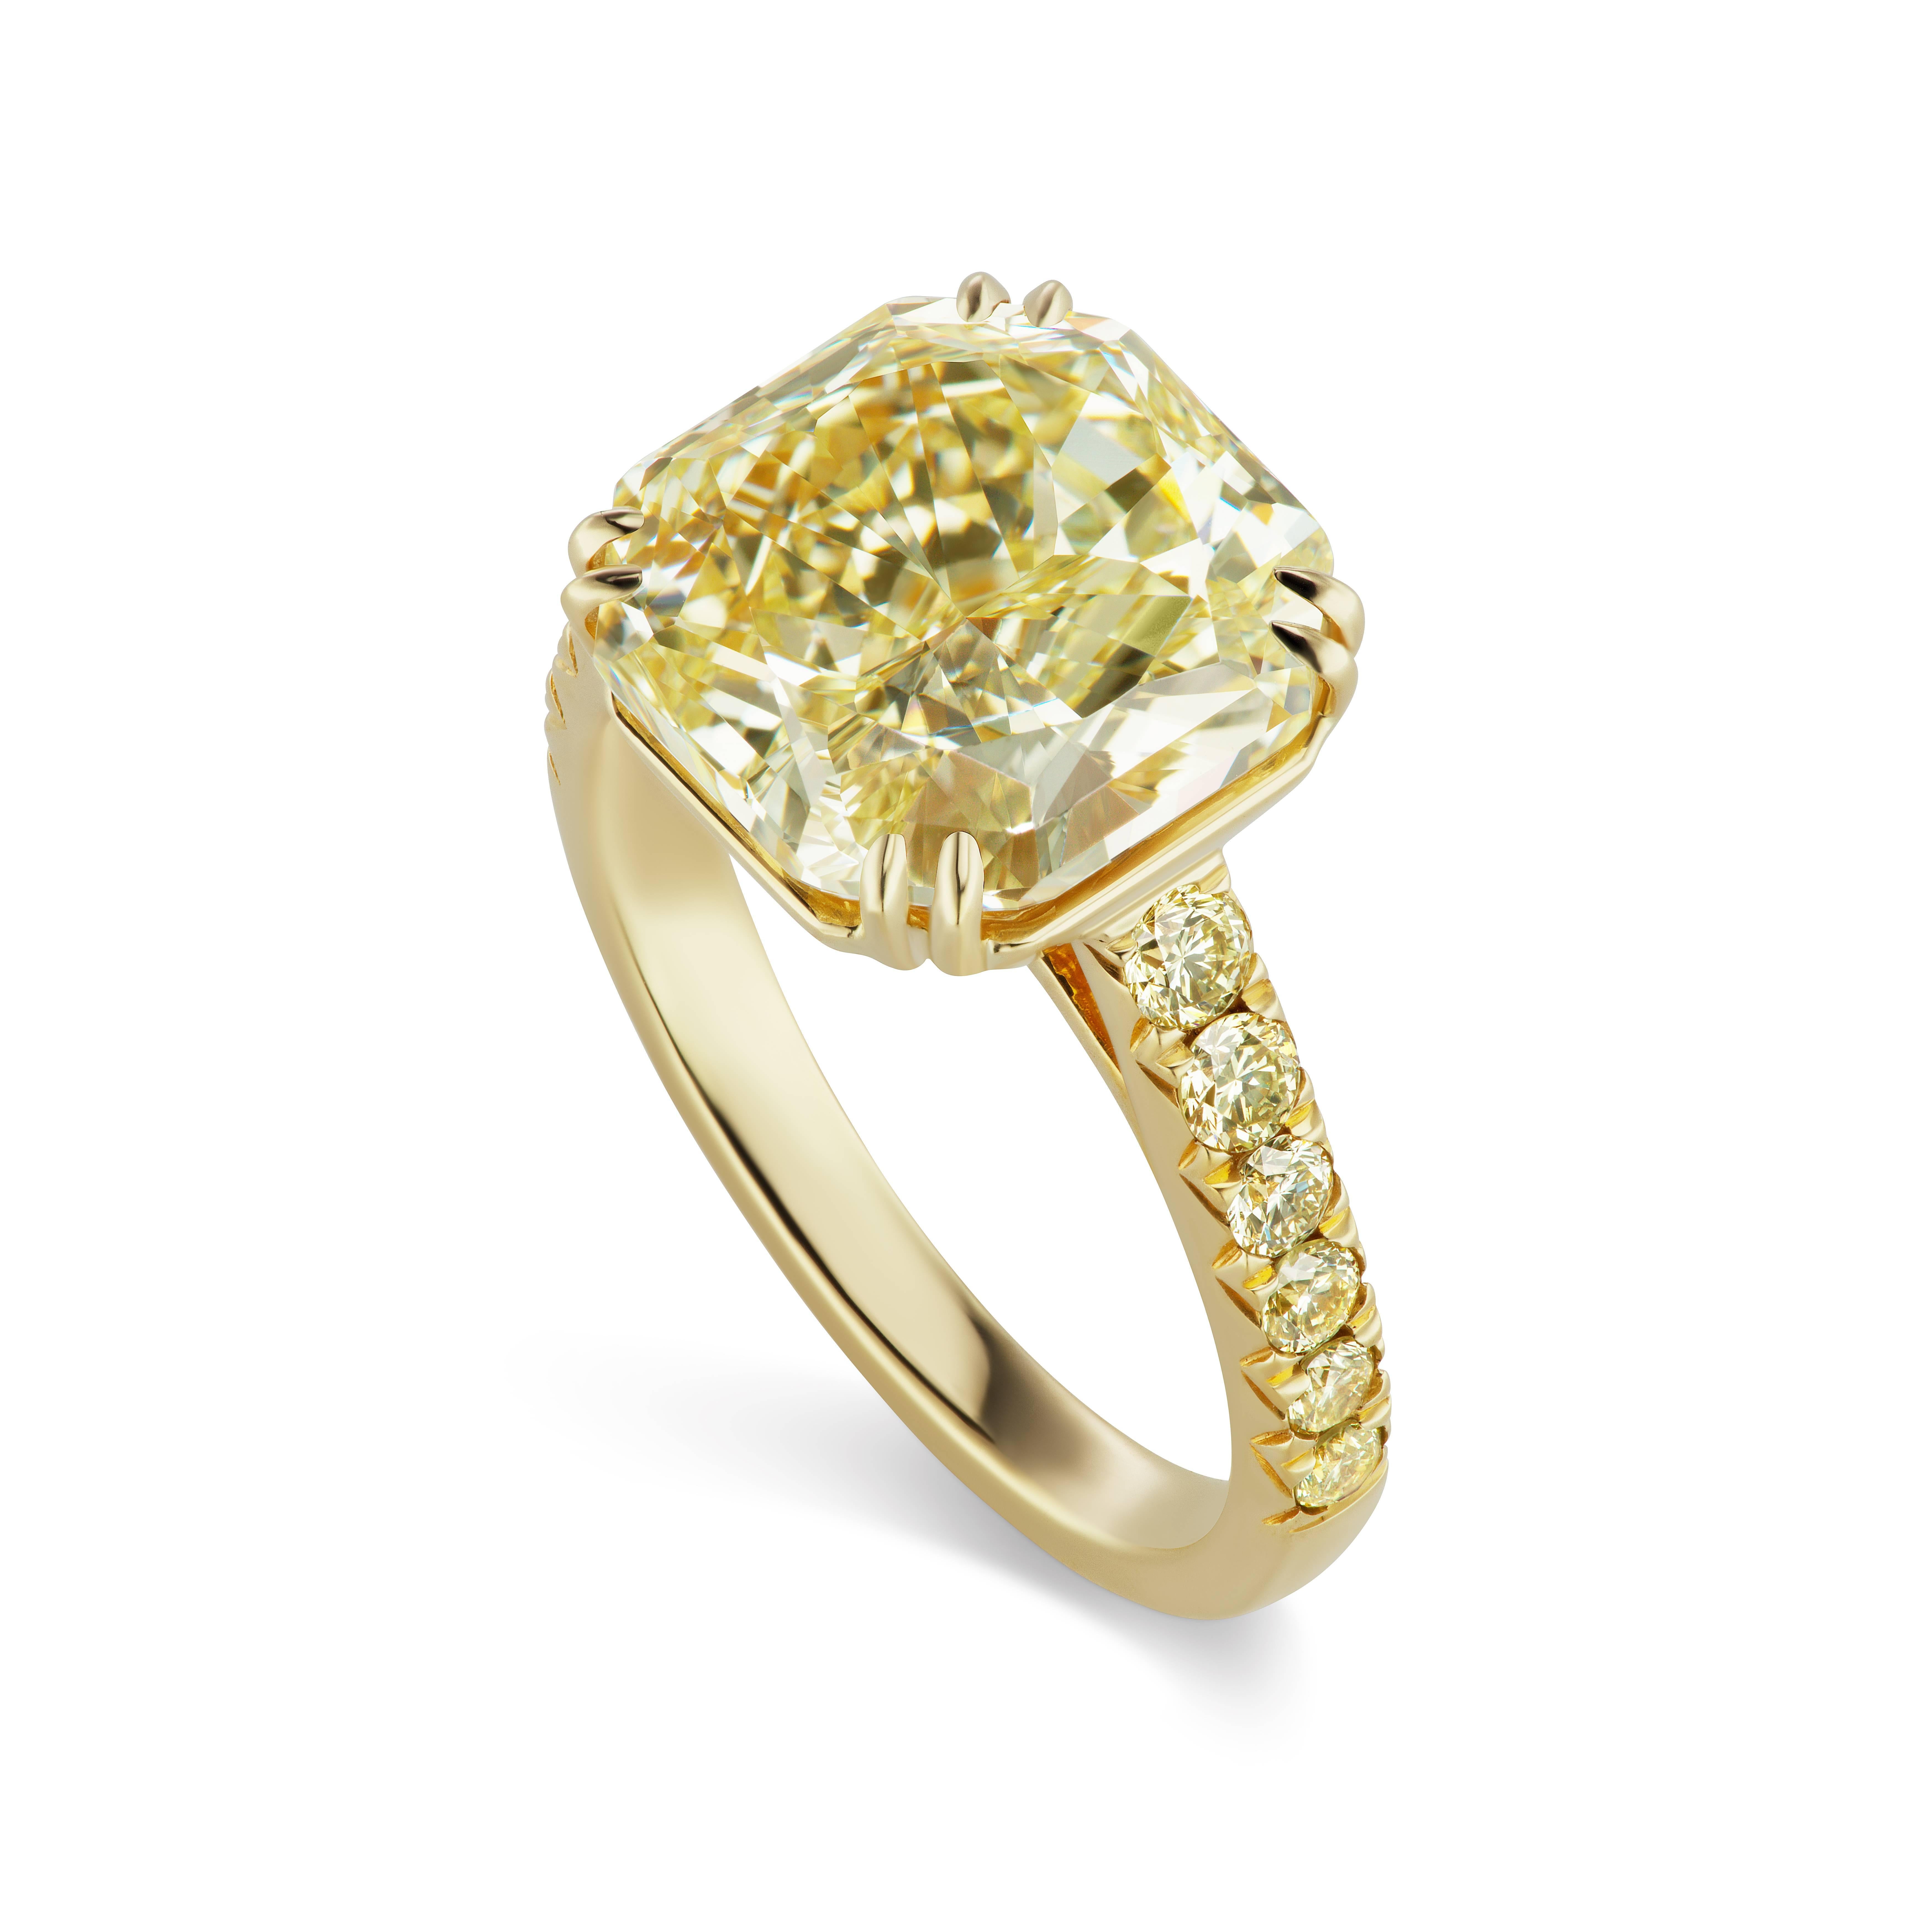 This Scarselli 5.69 carat  Fancy Light Yellow Radiant cut diamond is VVS2 clarity and is beautifully set with .44 carats of matching yellow VS clarity diamonds in 18 karat Yellow Gold.  A lovely neutral to wear with virtually any ensemble that